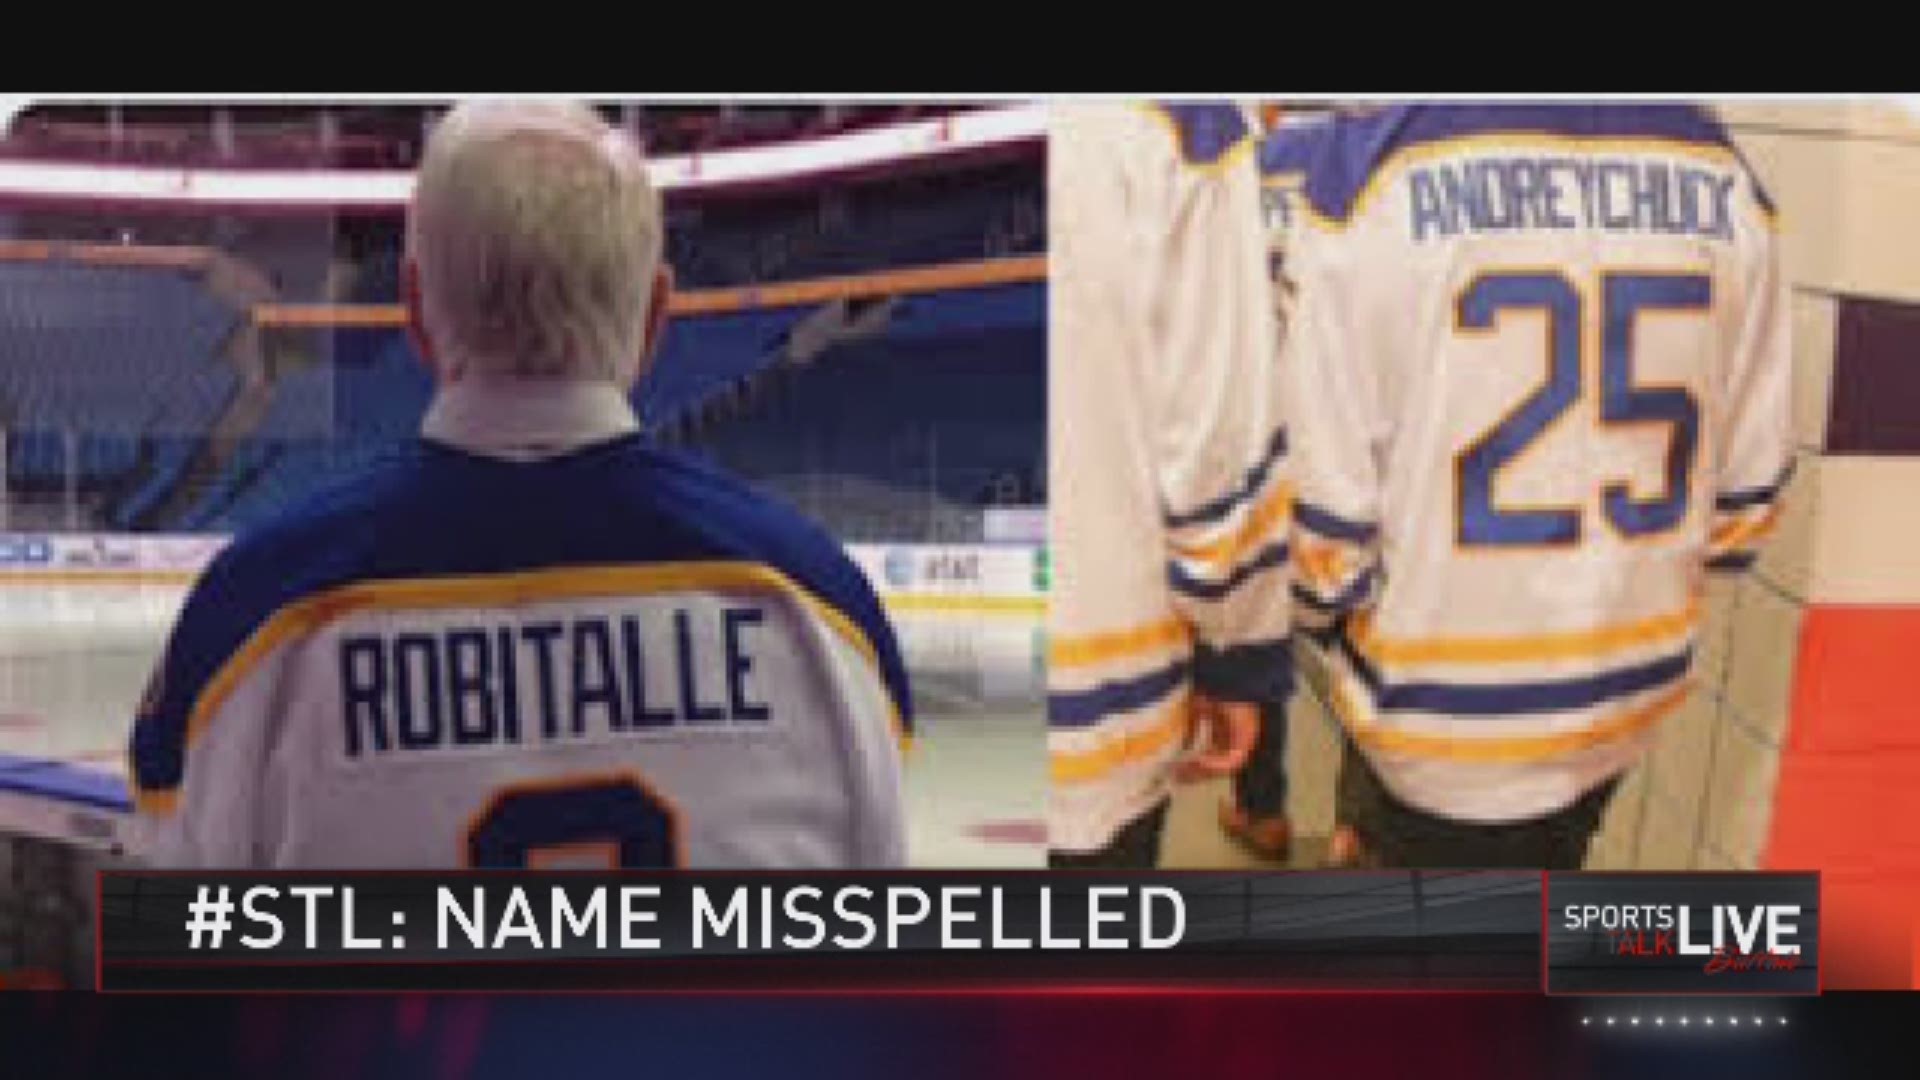 Sabres alum Mike Robitaille comments on the misspelling of his name on his jersey as the team celebrates the 50th anniversary of the franchise.